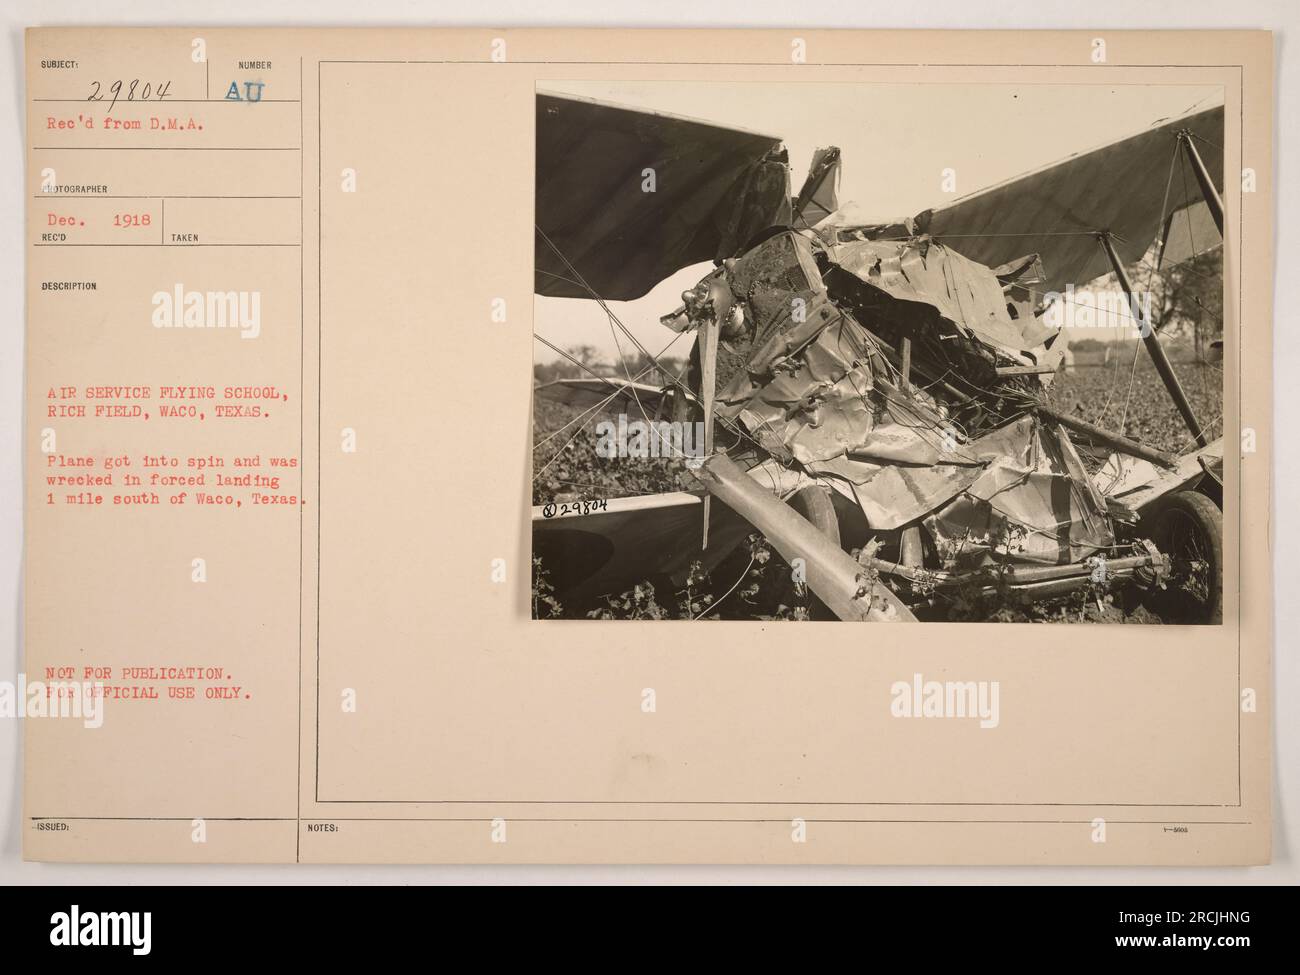 Image of a wrecked airplane at Rich Field, Waco, Texas, during World War One. The plane crashed after going into a spin during a forced landing, approximately one mile south of Waco. D.M.A. Photographer captured this image on December 1918. This photo is not meant for publication and is for official use only. Stock Photo